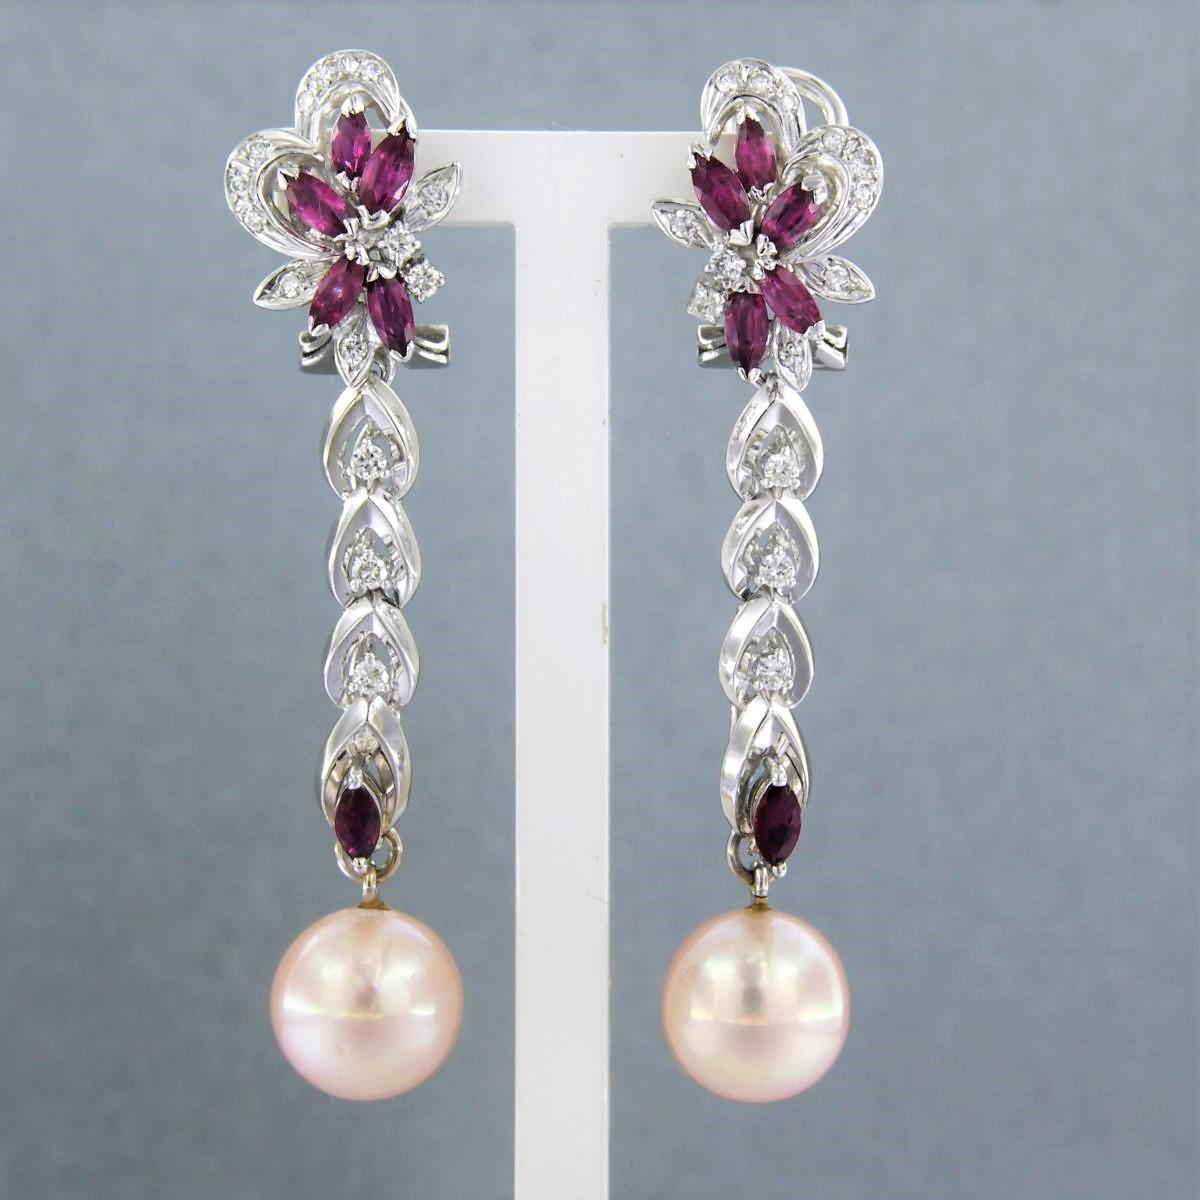 14k white gold earrings set with ruby, pearl and brilliant cut diamonds. 0.30ct - F/G - VS/SI

detailed description:

the size of the earring is 5.5 cm long by 1.2 cm wide

weight: 13.6 grams

occupied with :

- 2 x 1.0 cm freshwater pearl

color